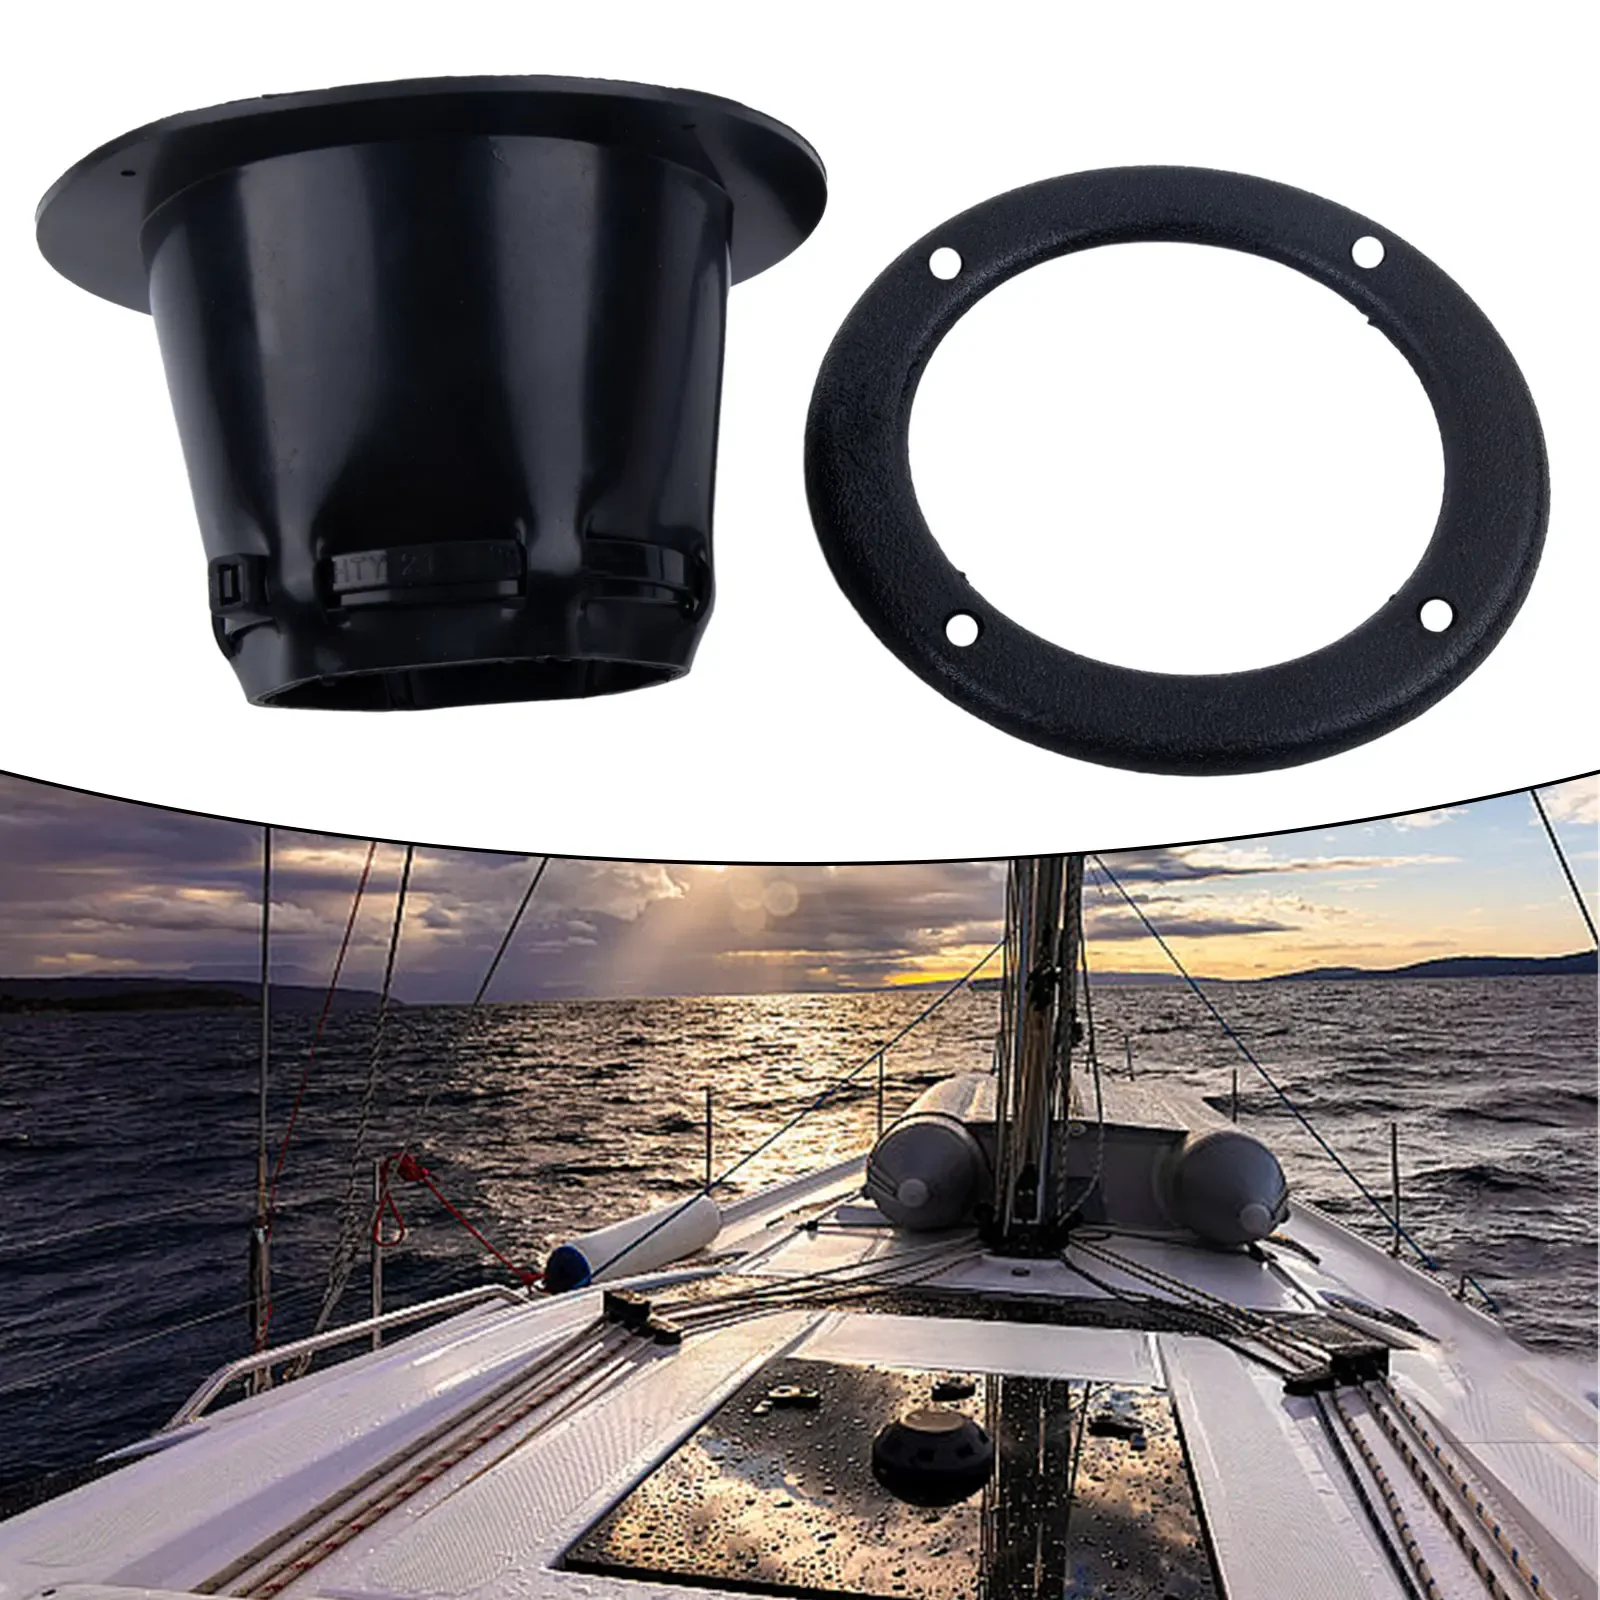 

Universal Marine Transom Boat Cable Boot Accessories Black Boat Steering Cable Boot Dia. 120mm Durable High Quality